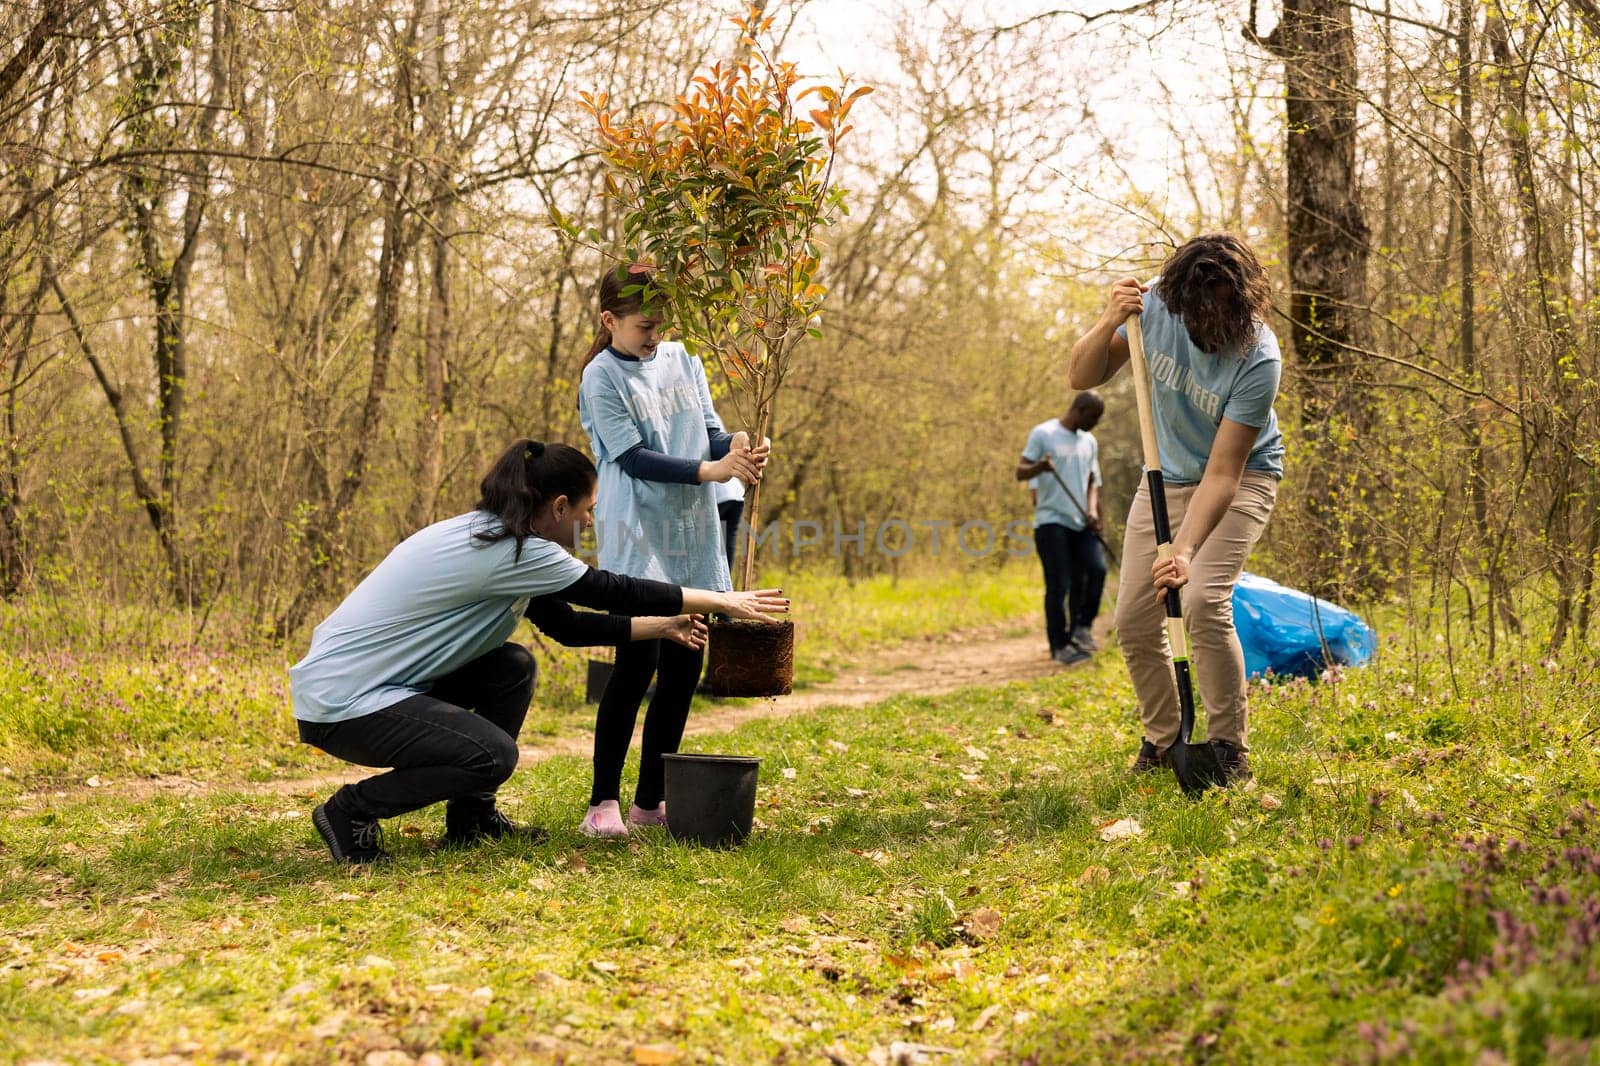 Team of activists planting trees around the woods area for nature preservation by DCStudio